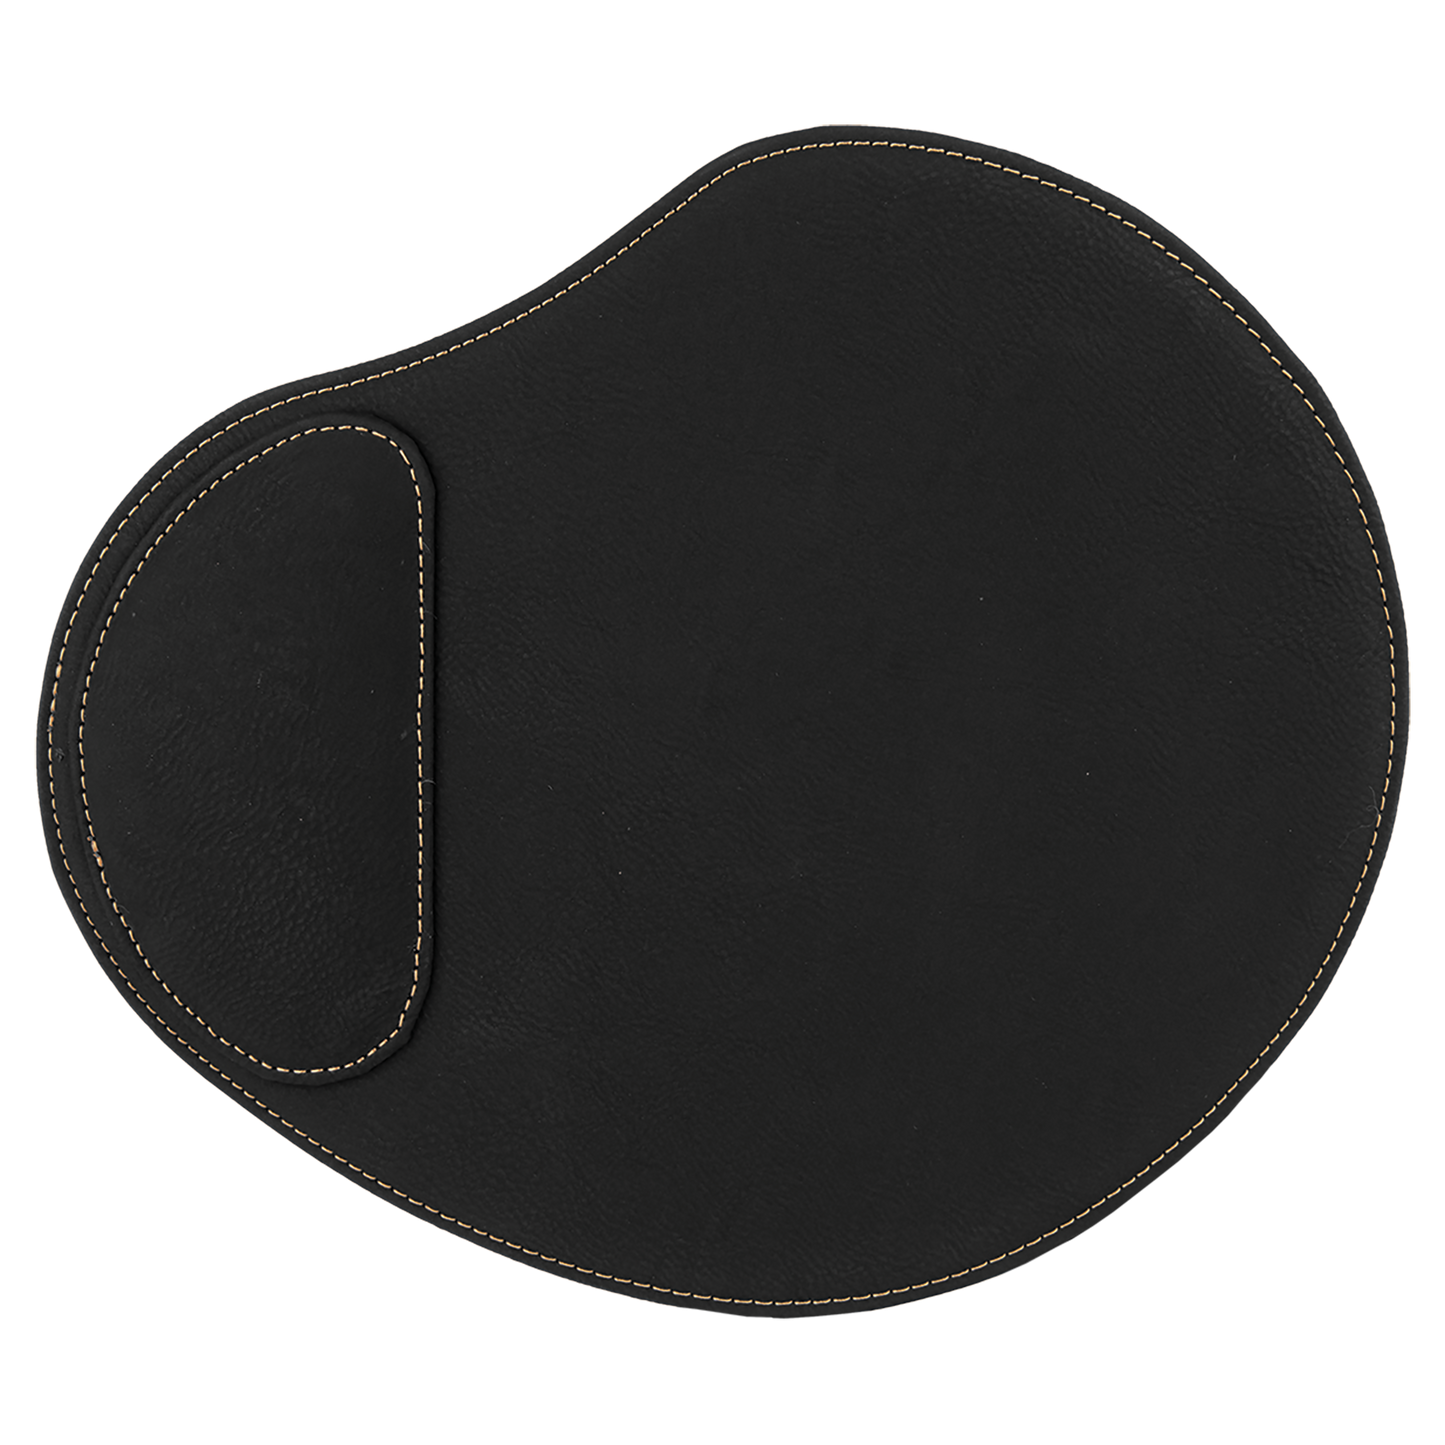 Custom Engraved 9" x 10 1/4" Black/Gold Leatherette Mouse Pad